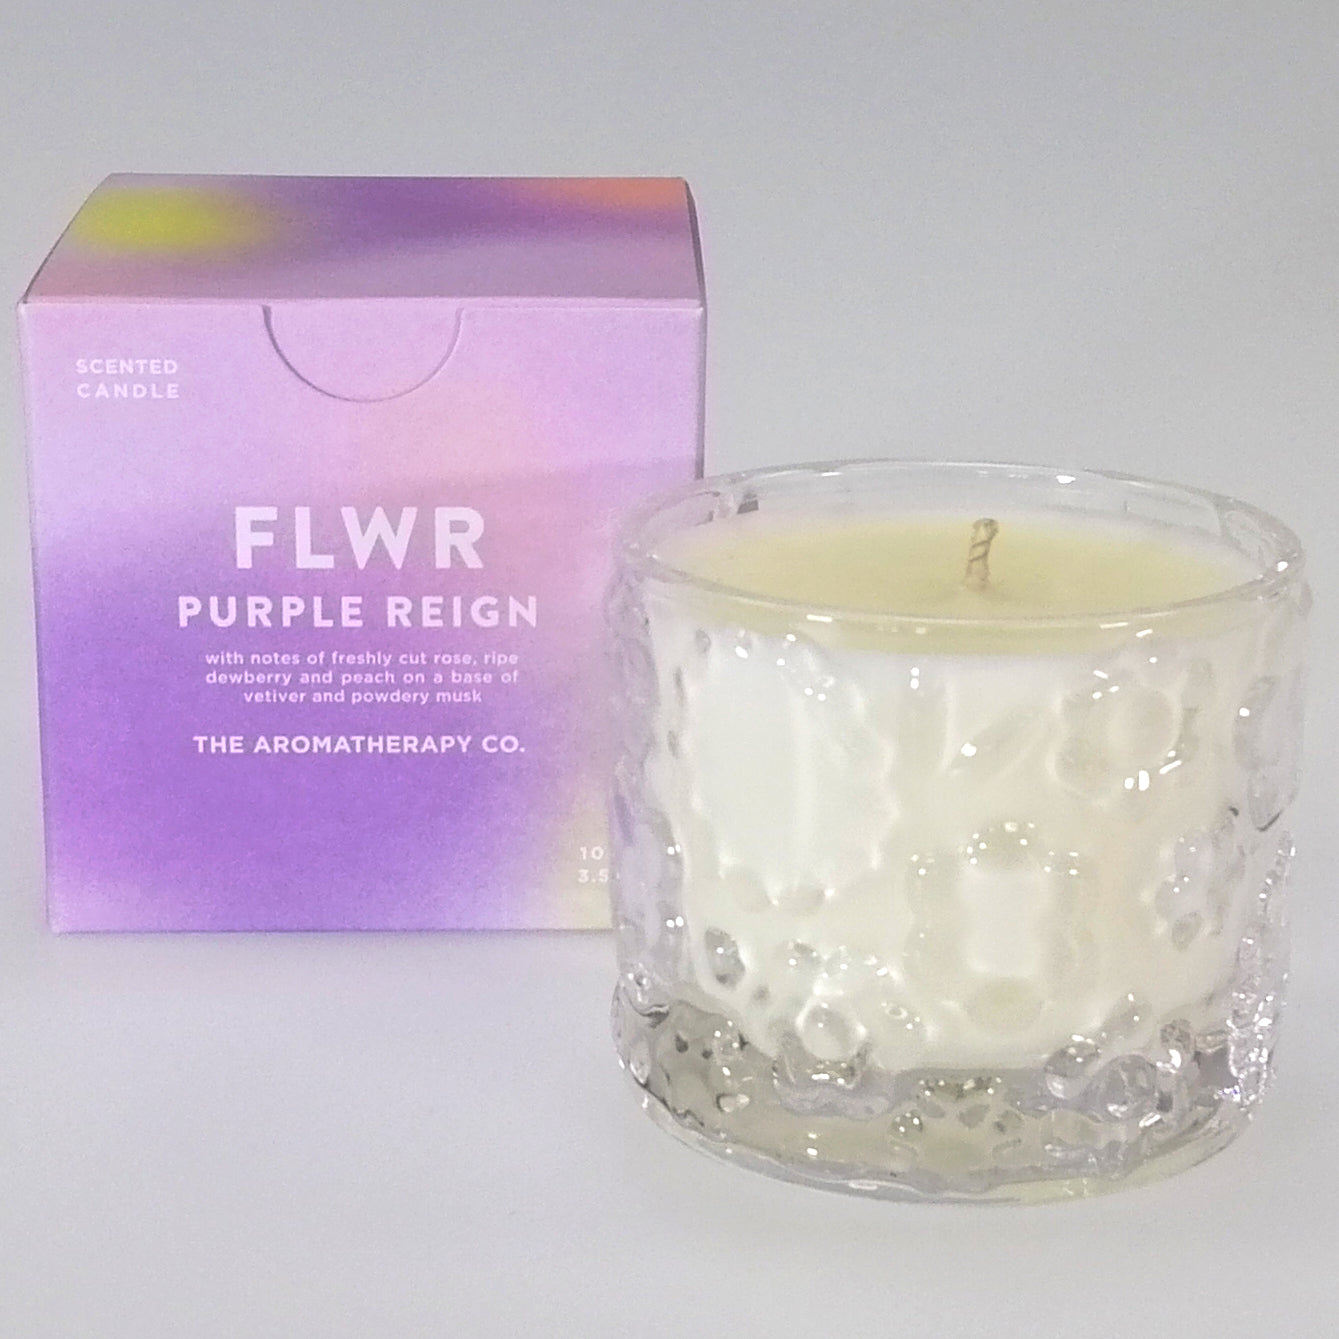 The Aromatherapy Co. FLWR Candle - Purple Reign